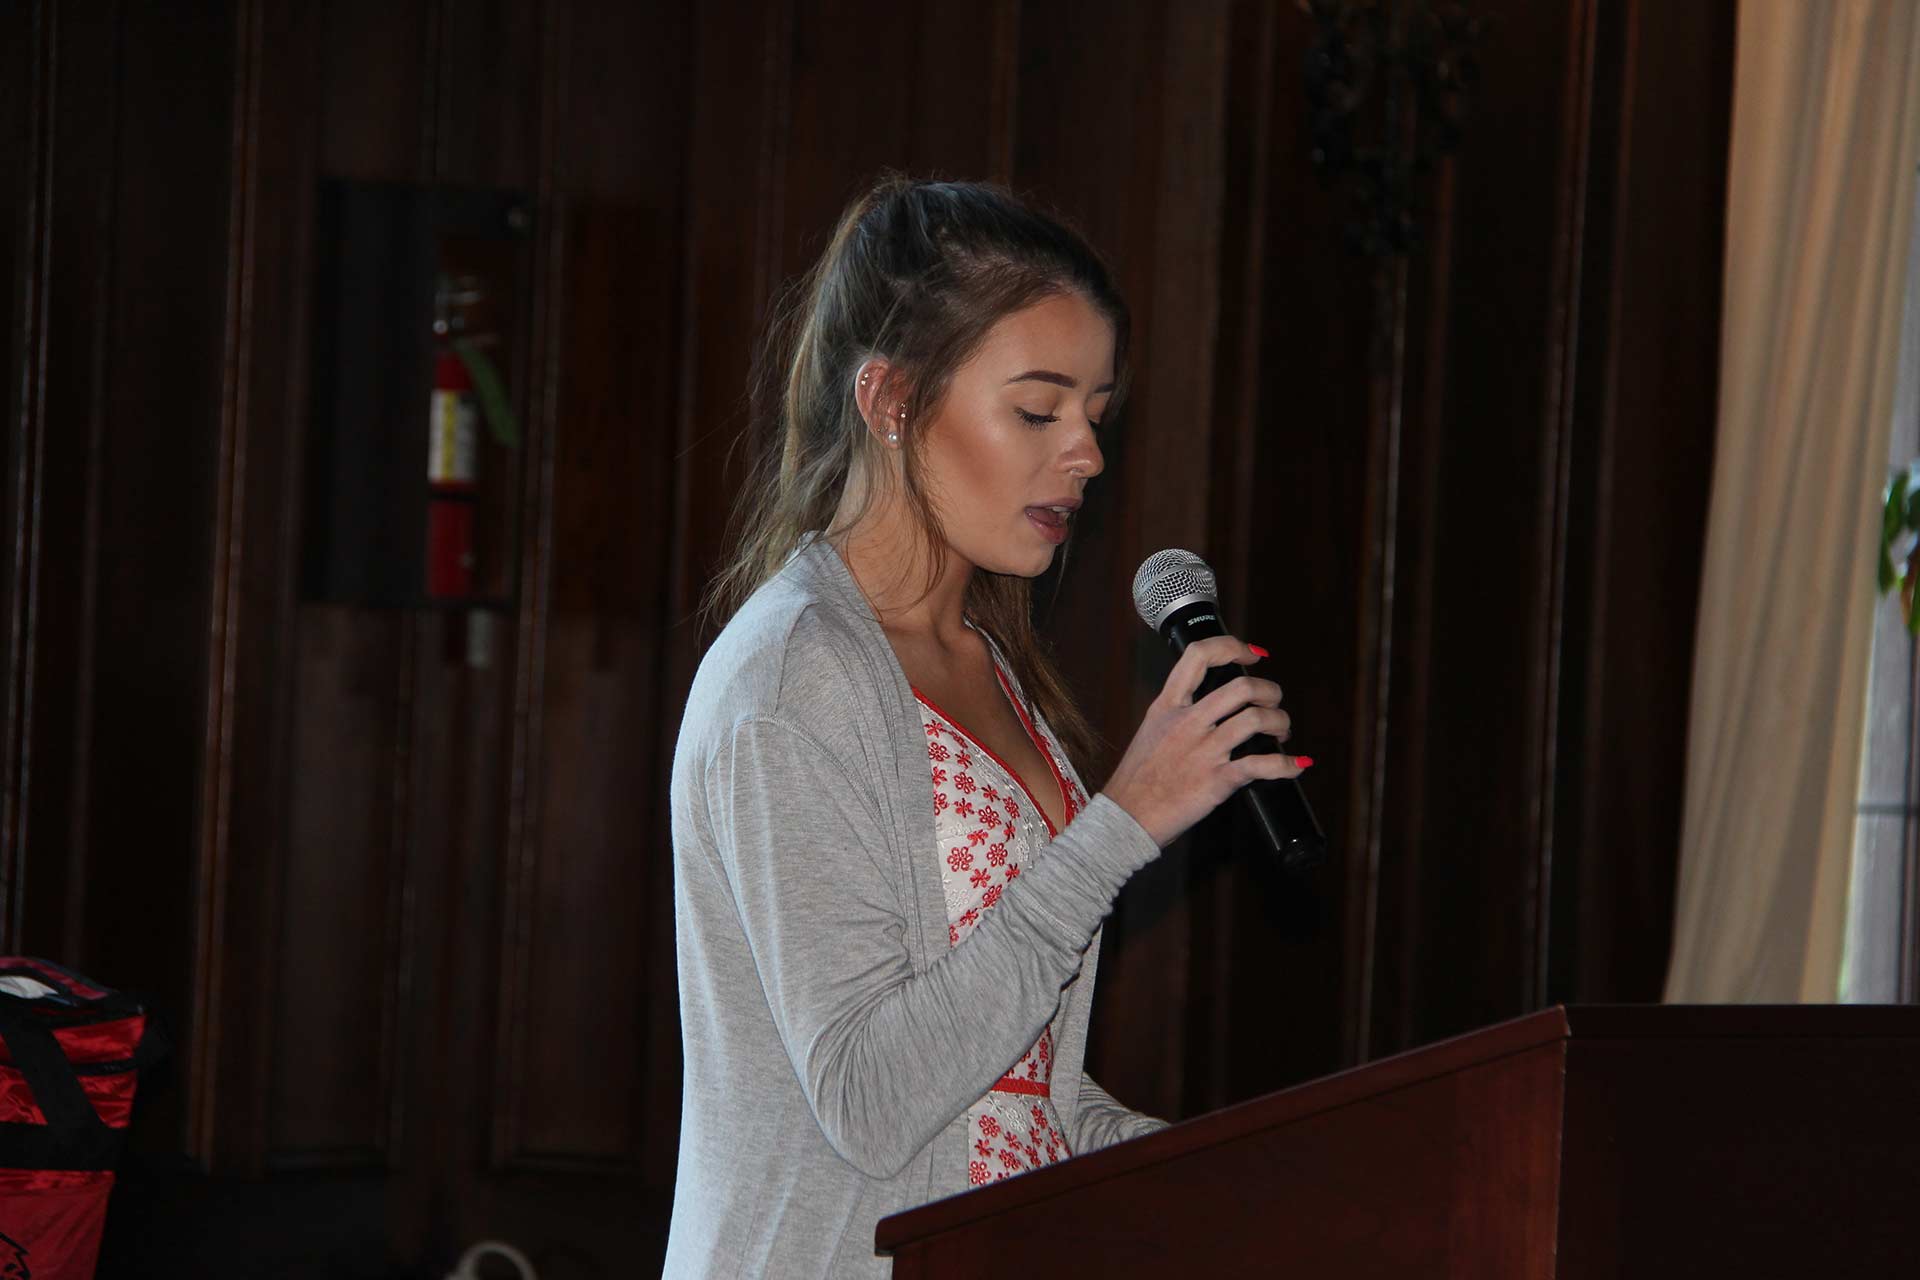 marist-law-association-golf-outing-female-speaking-into-microphone